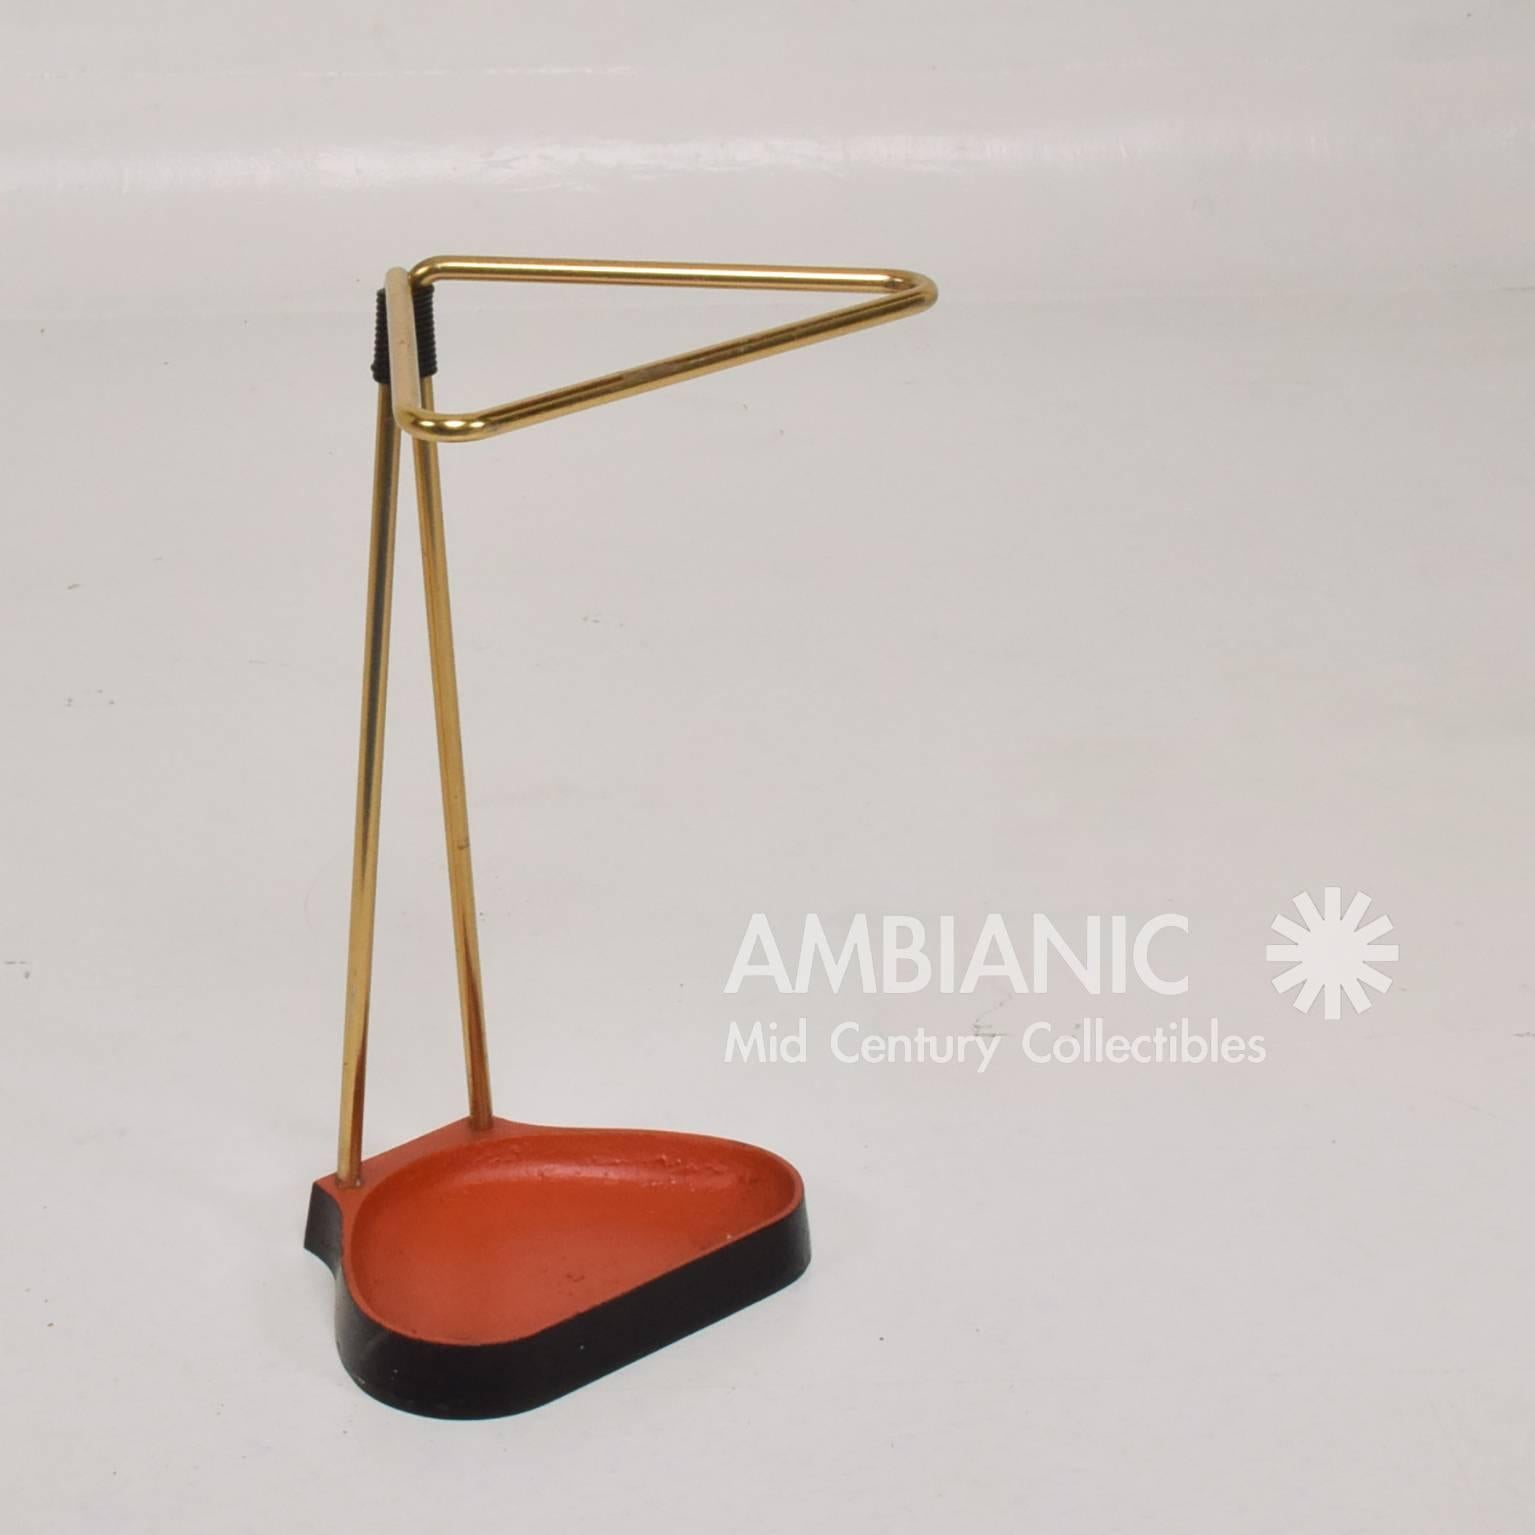 For your consideration a vintage umbrella or cane holder. Made in Europe, circa 1950s. Cast iron base painted in black and red with sculptural body in brass. There is numbers stamped underneath the cast iron piece, however there is no information